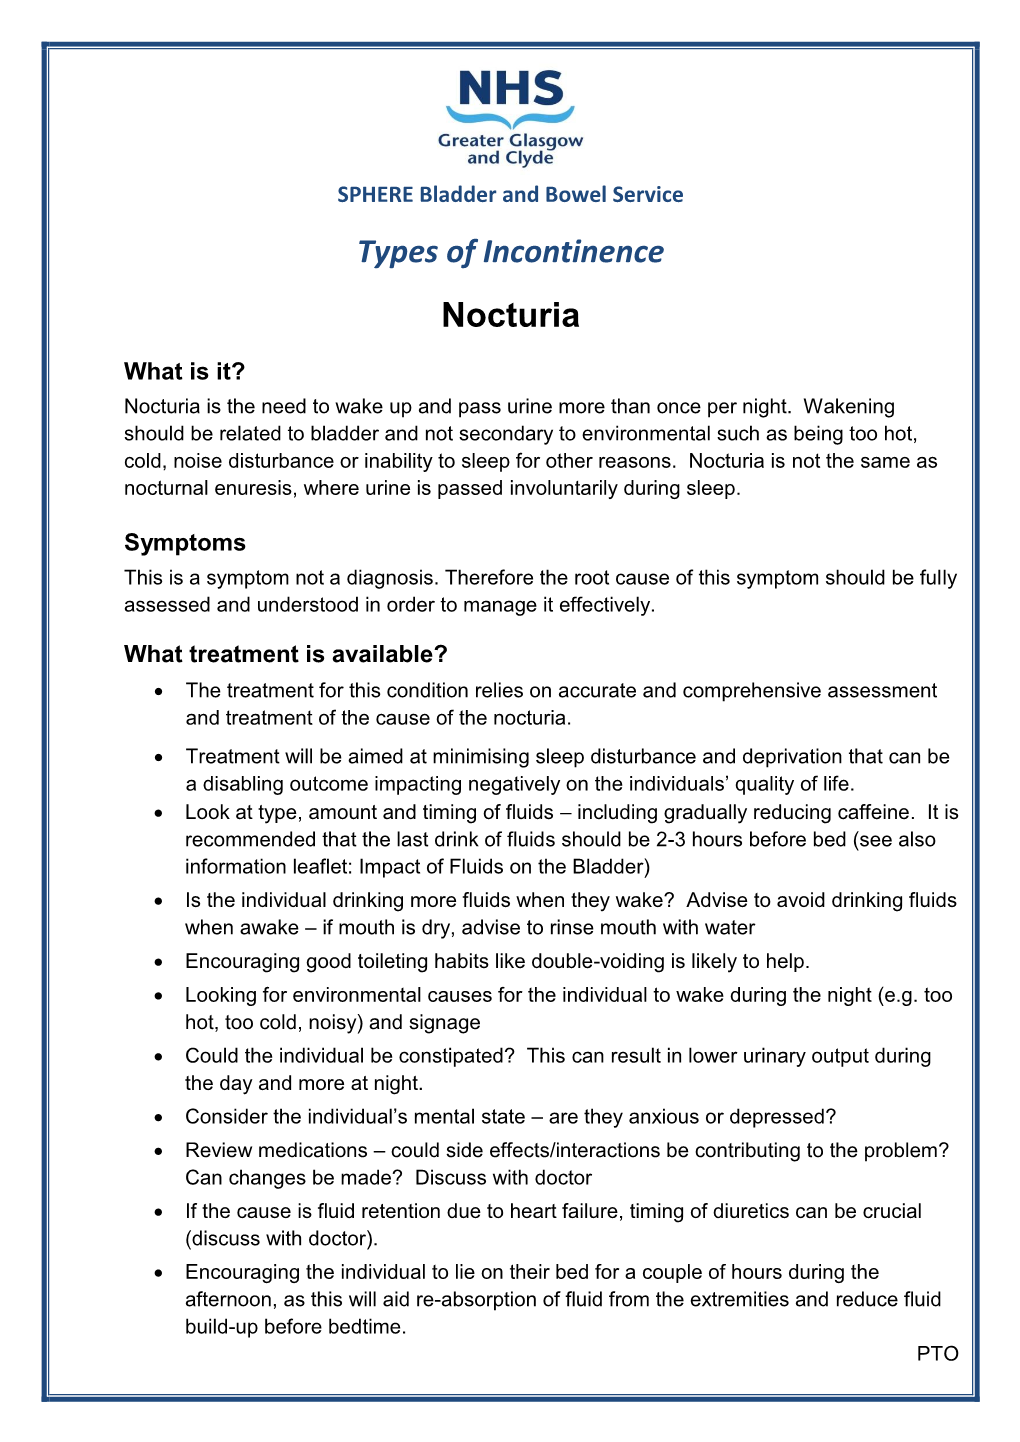 Types of Incontinence Nocturia